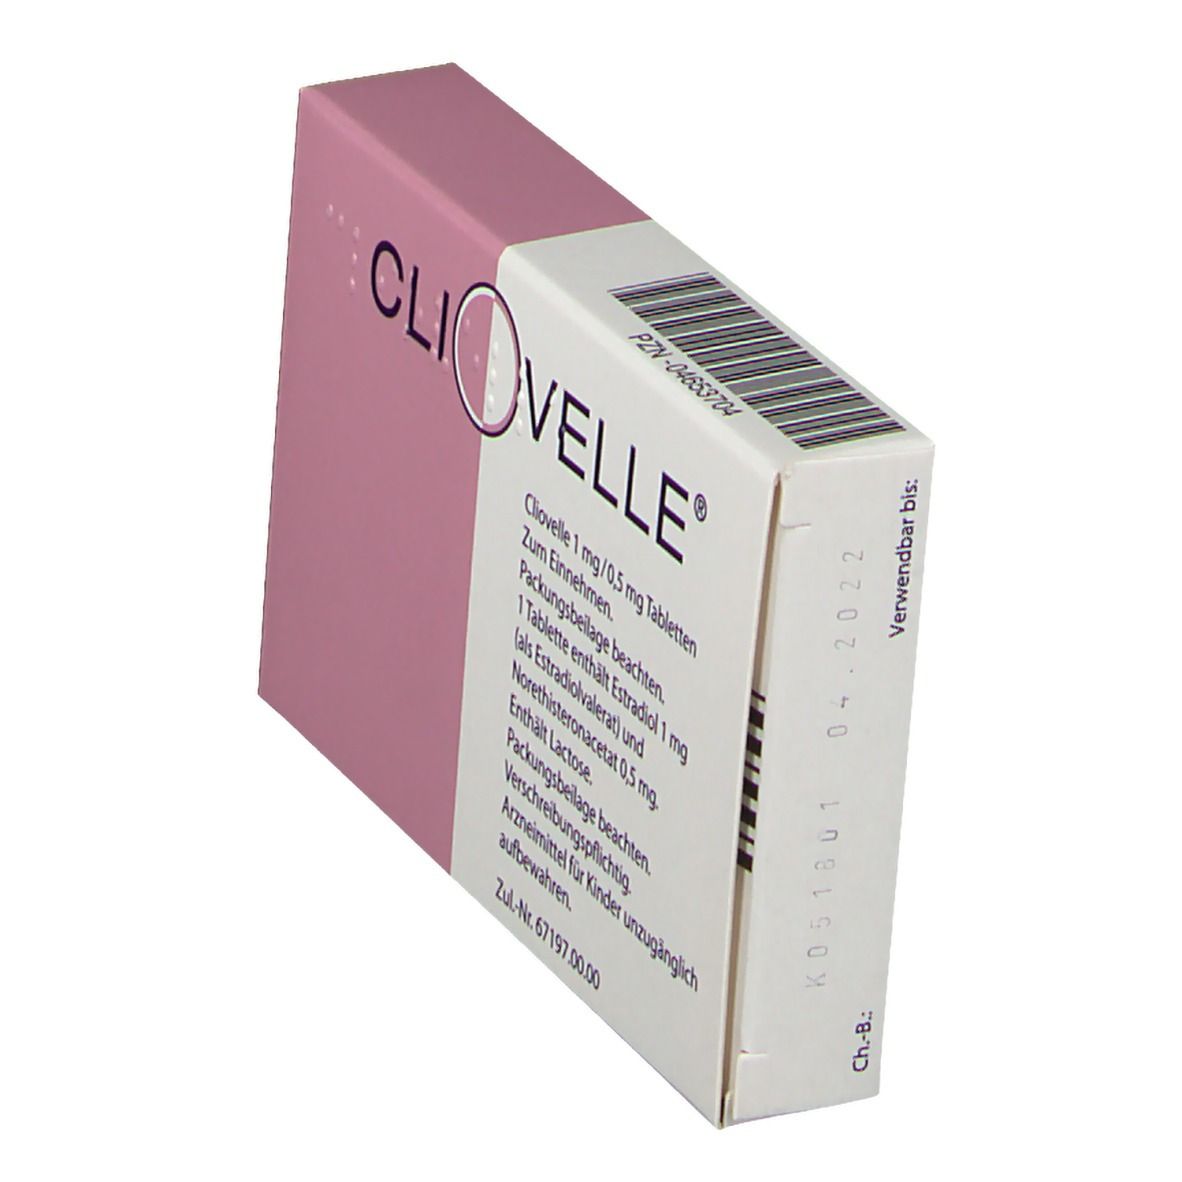 CLIOVELLE® 1 mg/0,5 mg